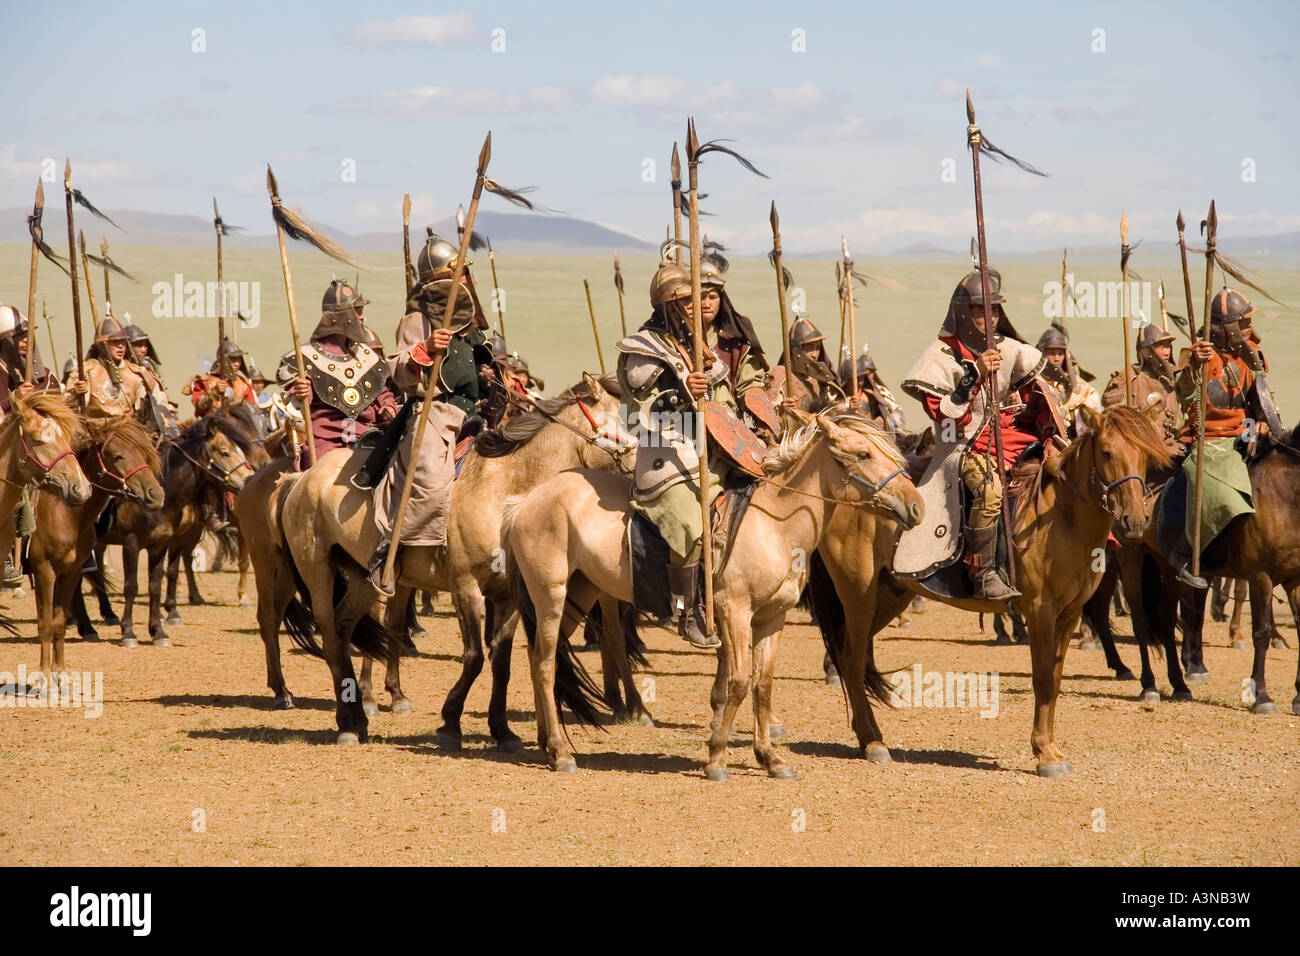 Mongolian warriors on horses armed with spears mustering for battle Stock Photo